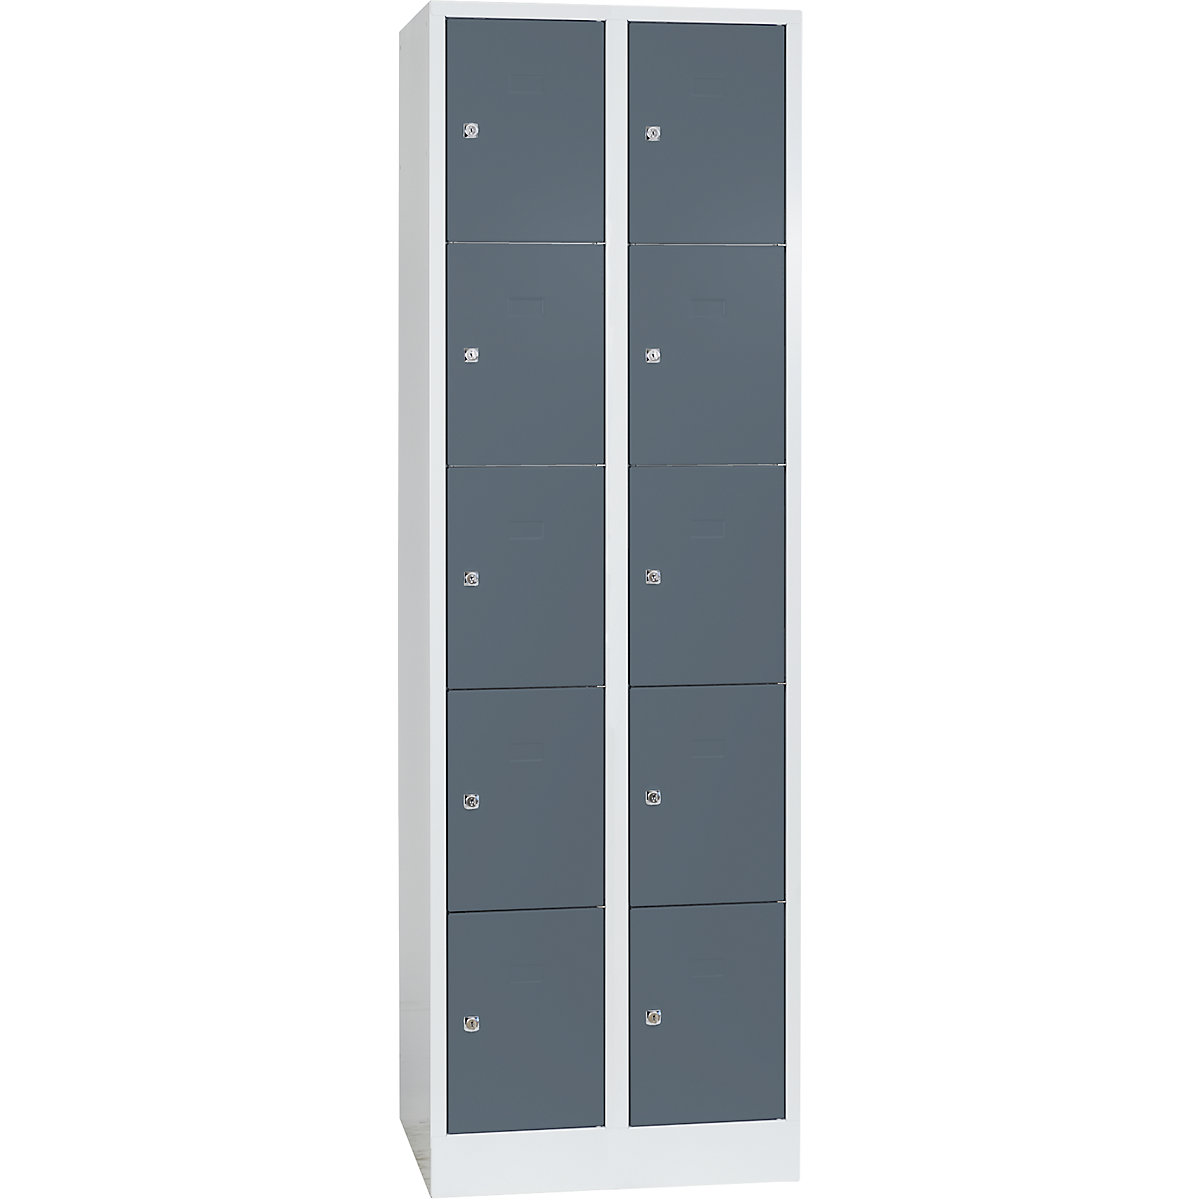 Cloakroom locker system – Wolf, 10 compartments, compartment width 300 mm, basalt grey / light grey-7